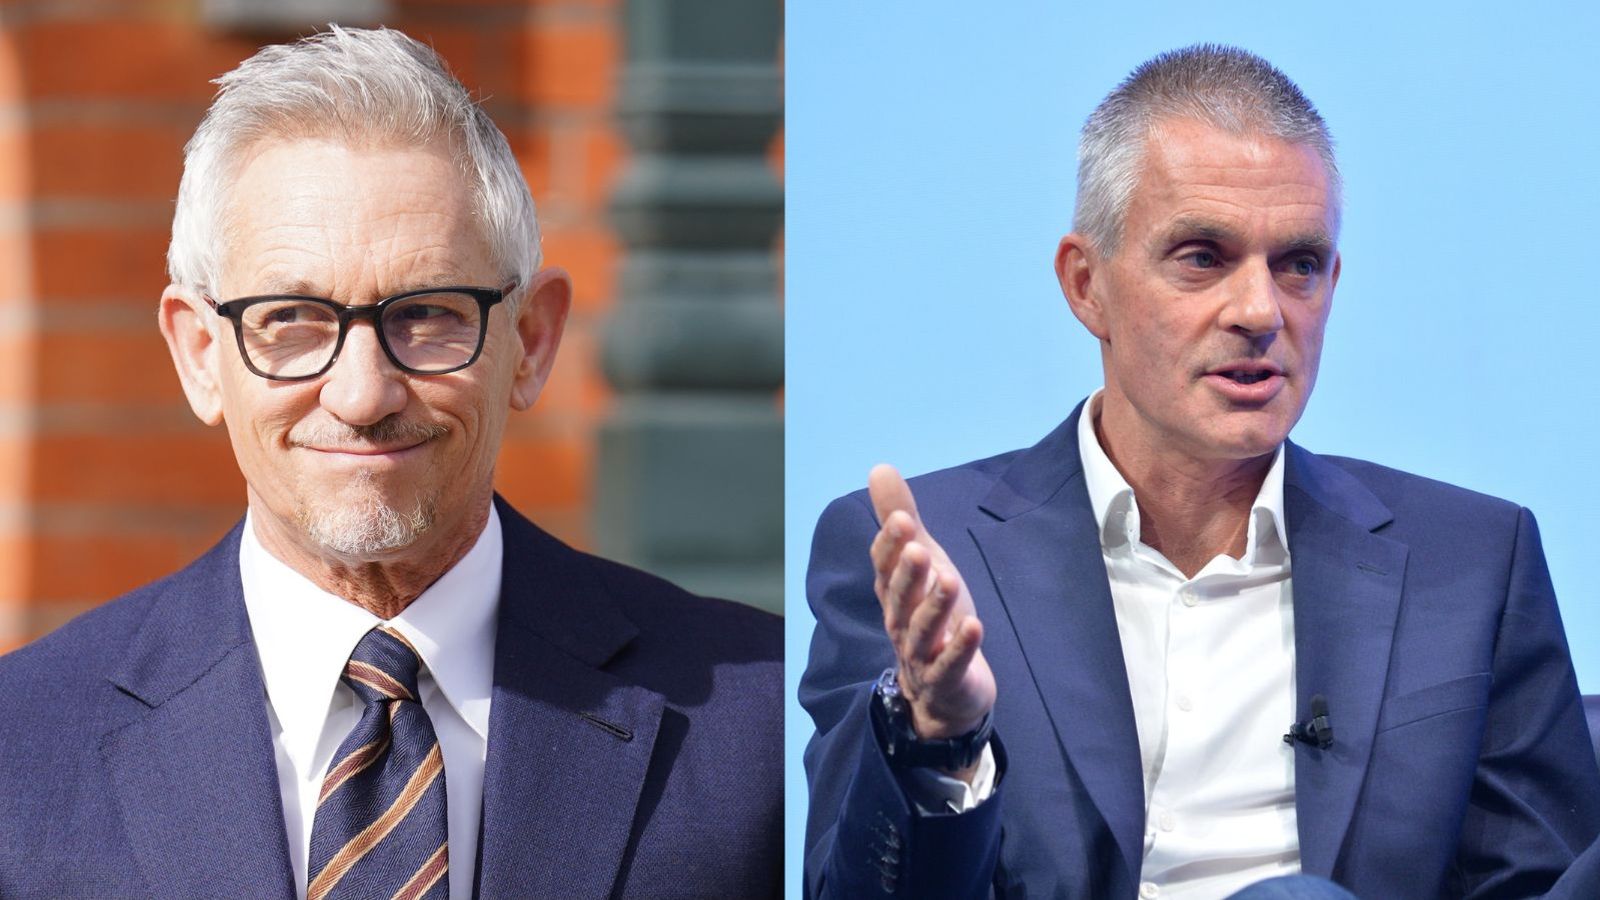 Gary Lineker row: BBC director general 'sorry' about lost football programmes and 'working very hard' to resolve dispute